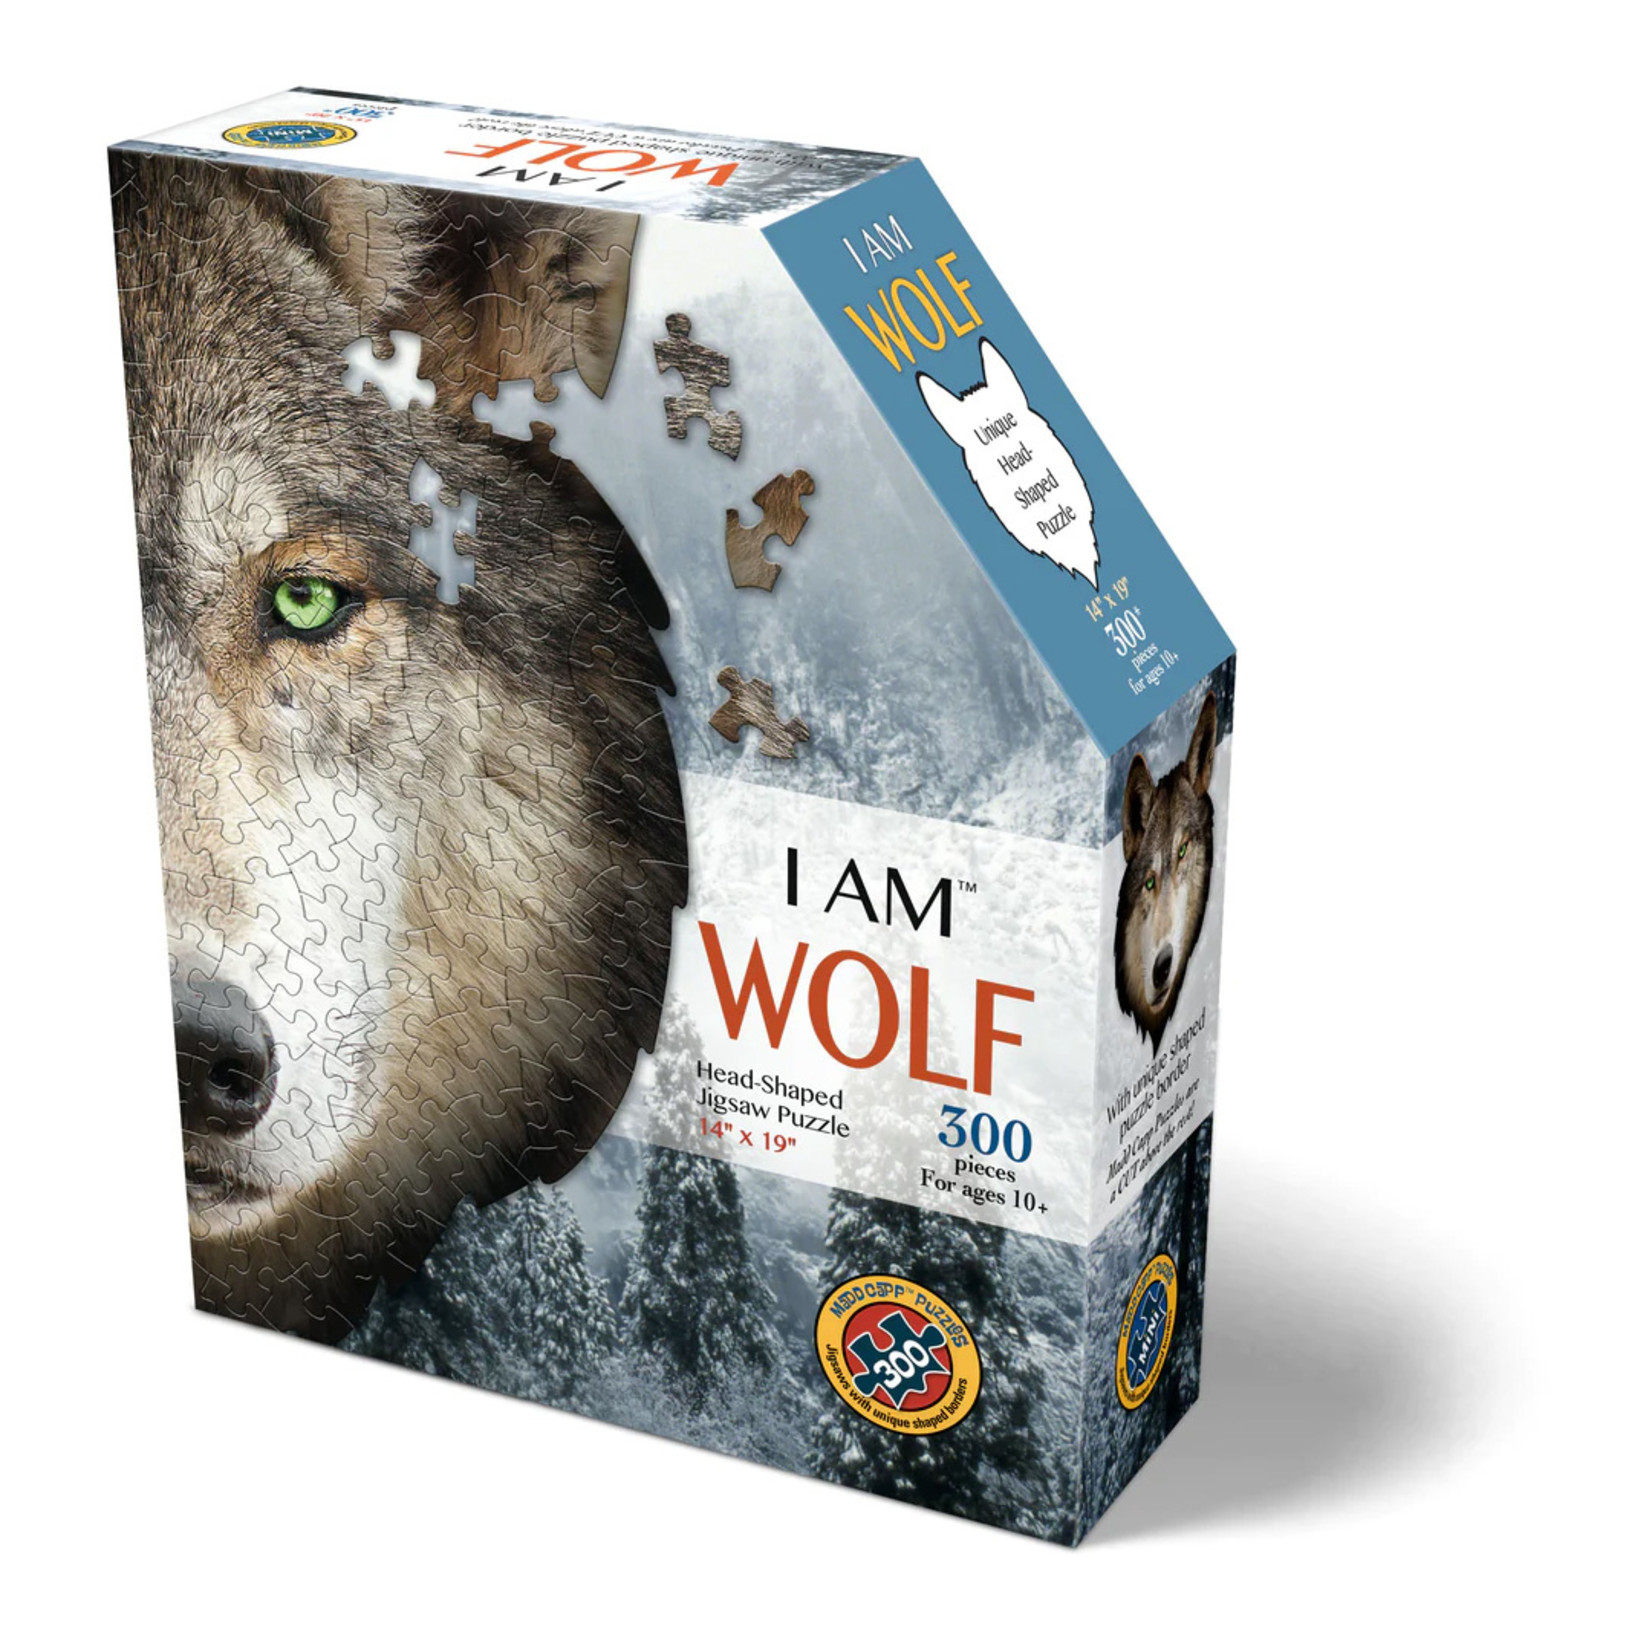 I AM WOLF Puzzle | 300 Pieces